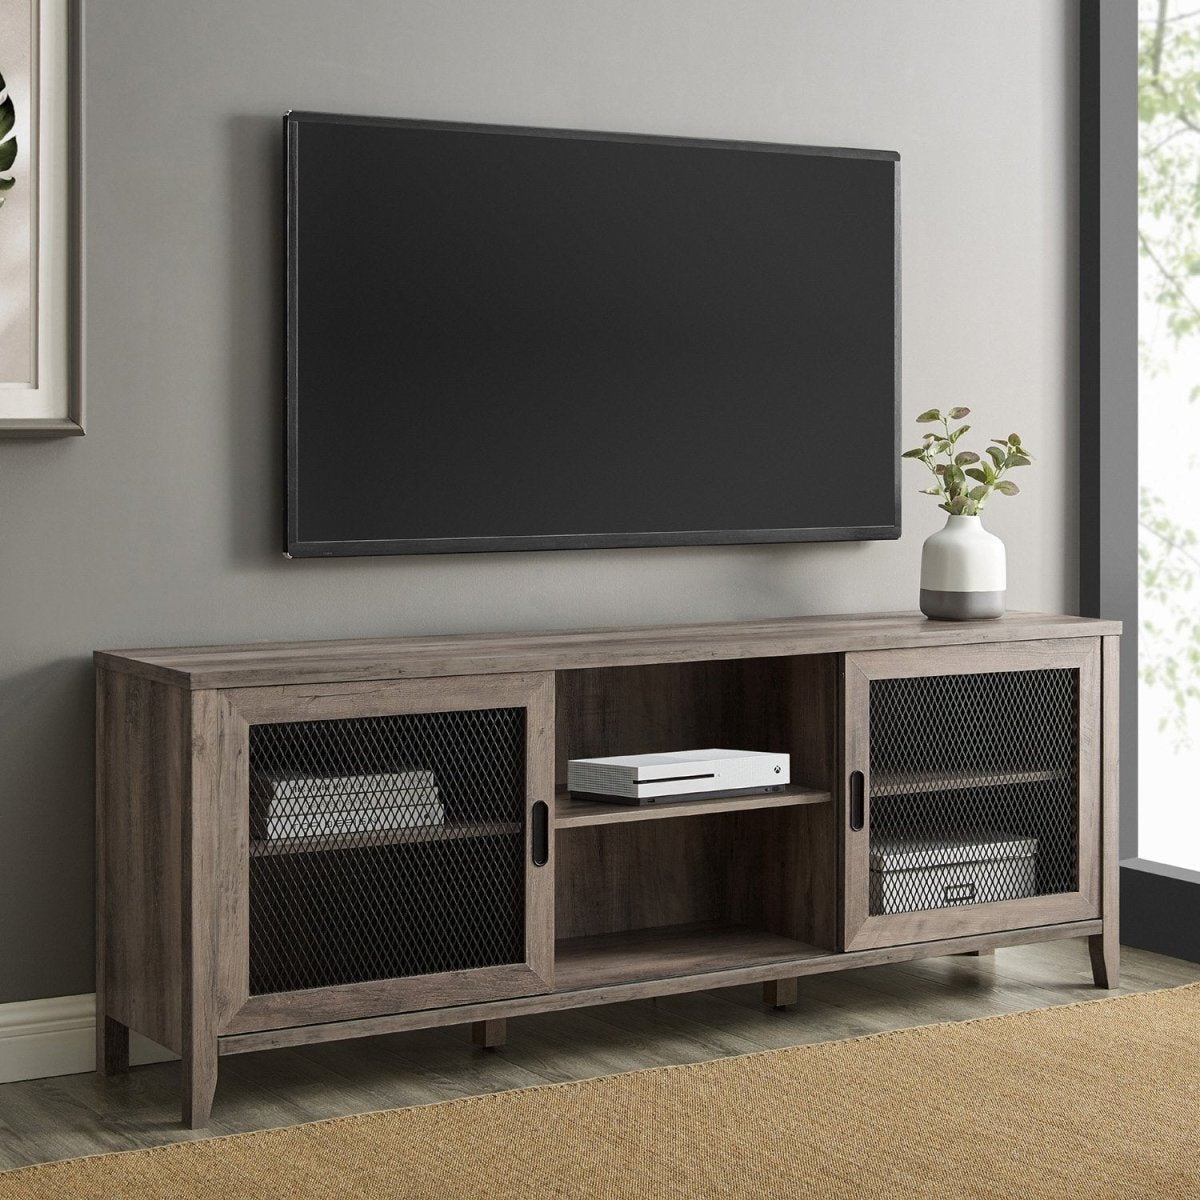 Walker Edison Arthur Industrial TV Stand with Sliding Mesh Door - lily & onyx